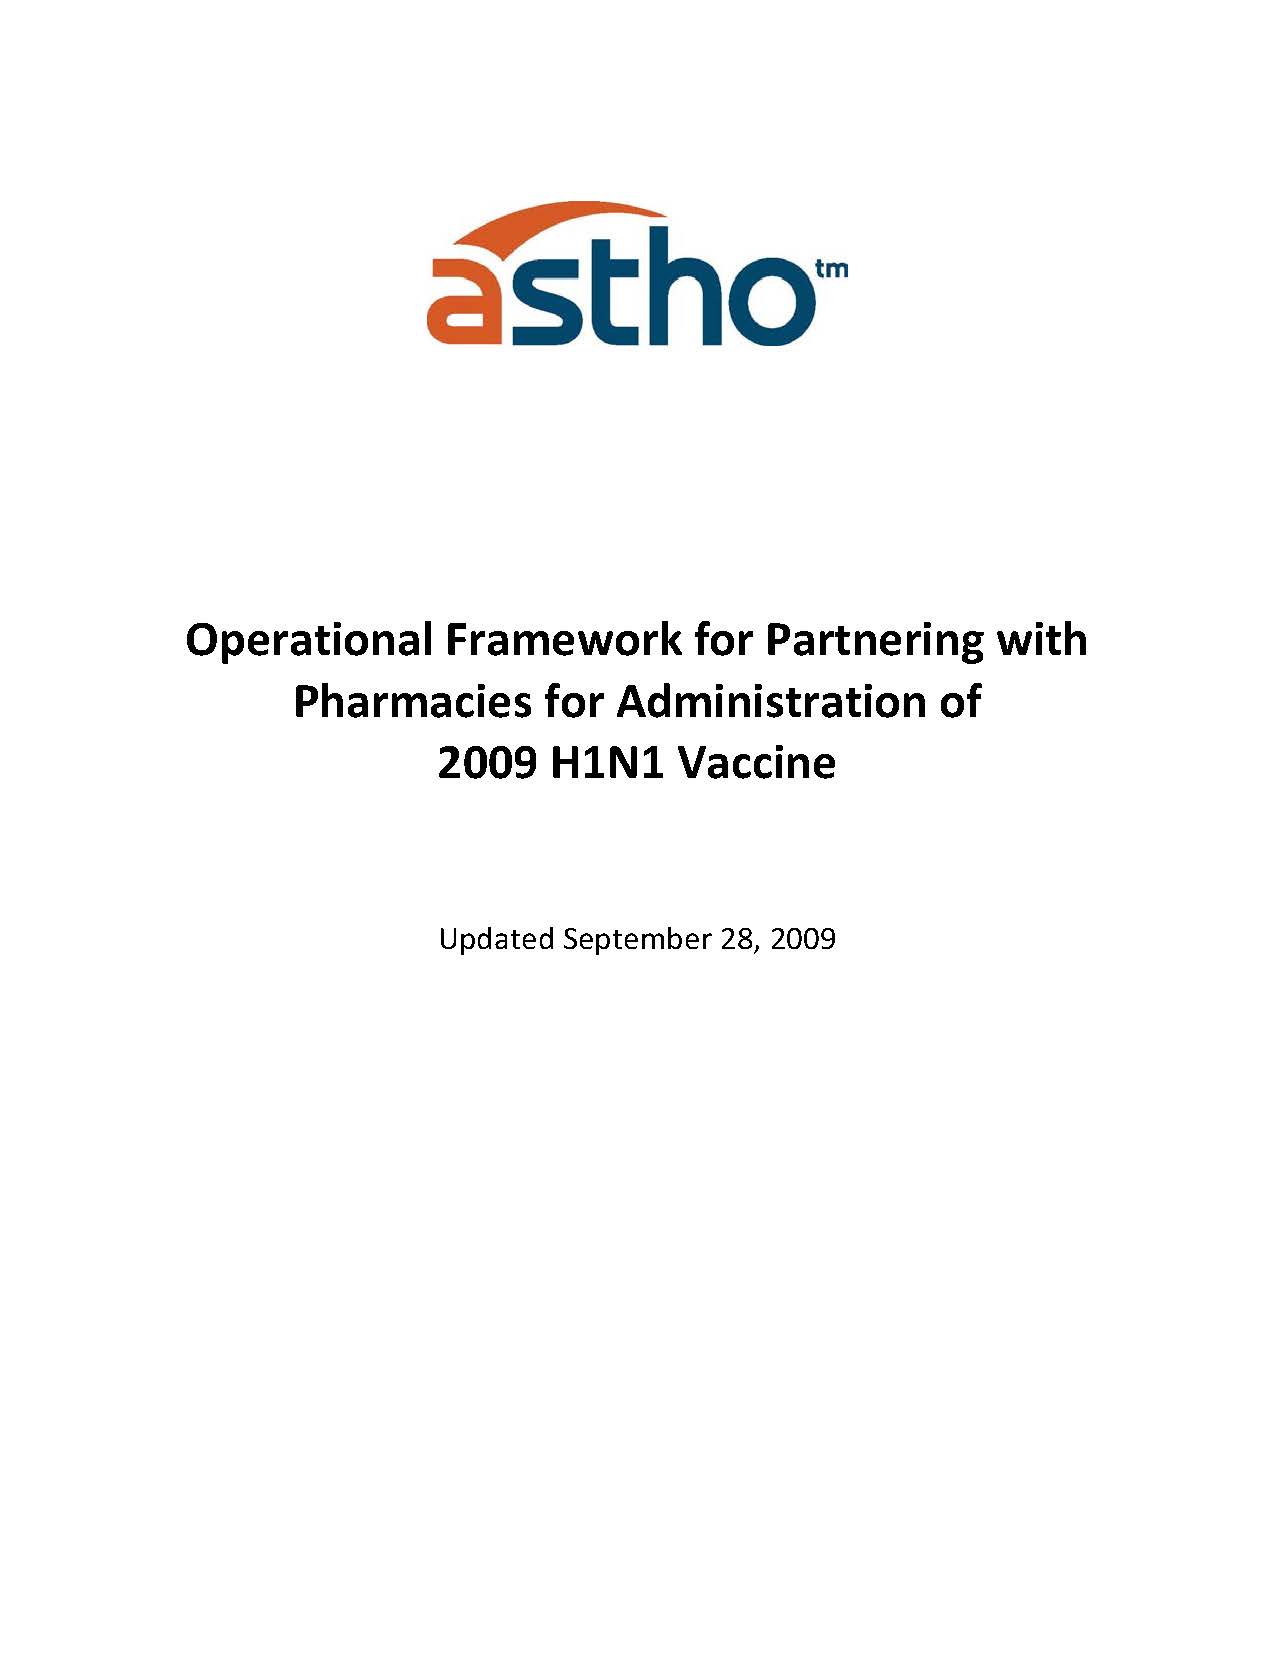 Operational Framework for Partnering with pharmacies for Administration of 2009 H1N1 Vaccine